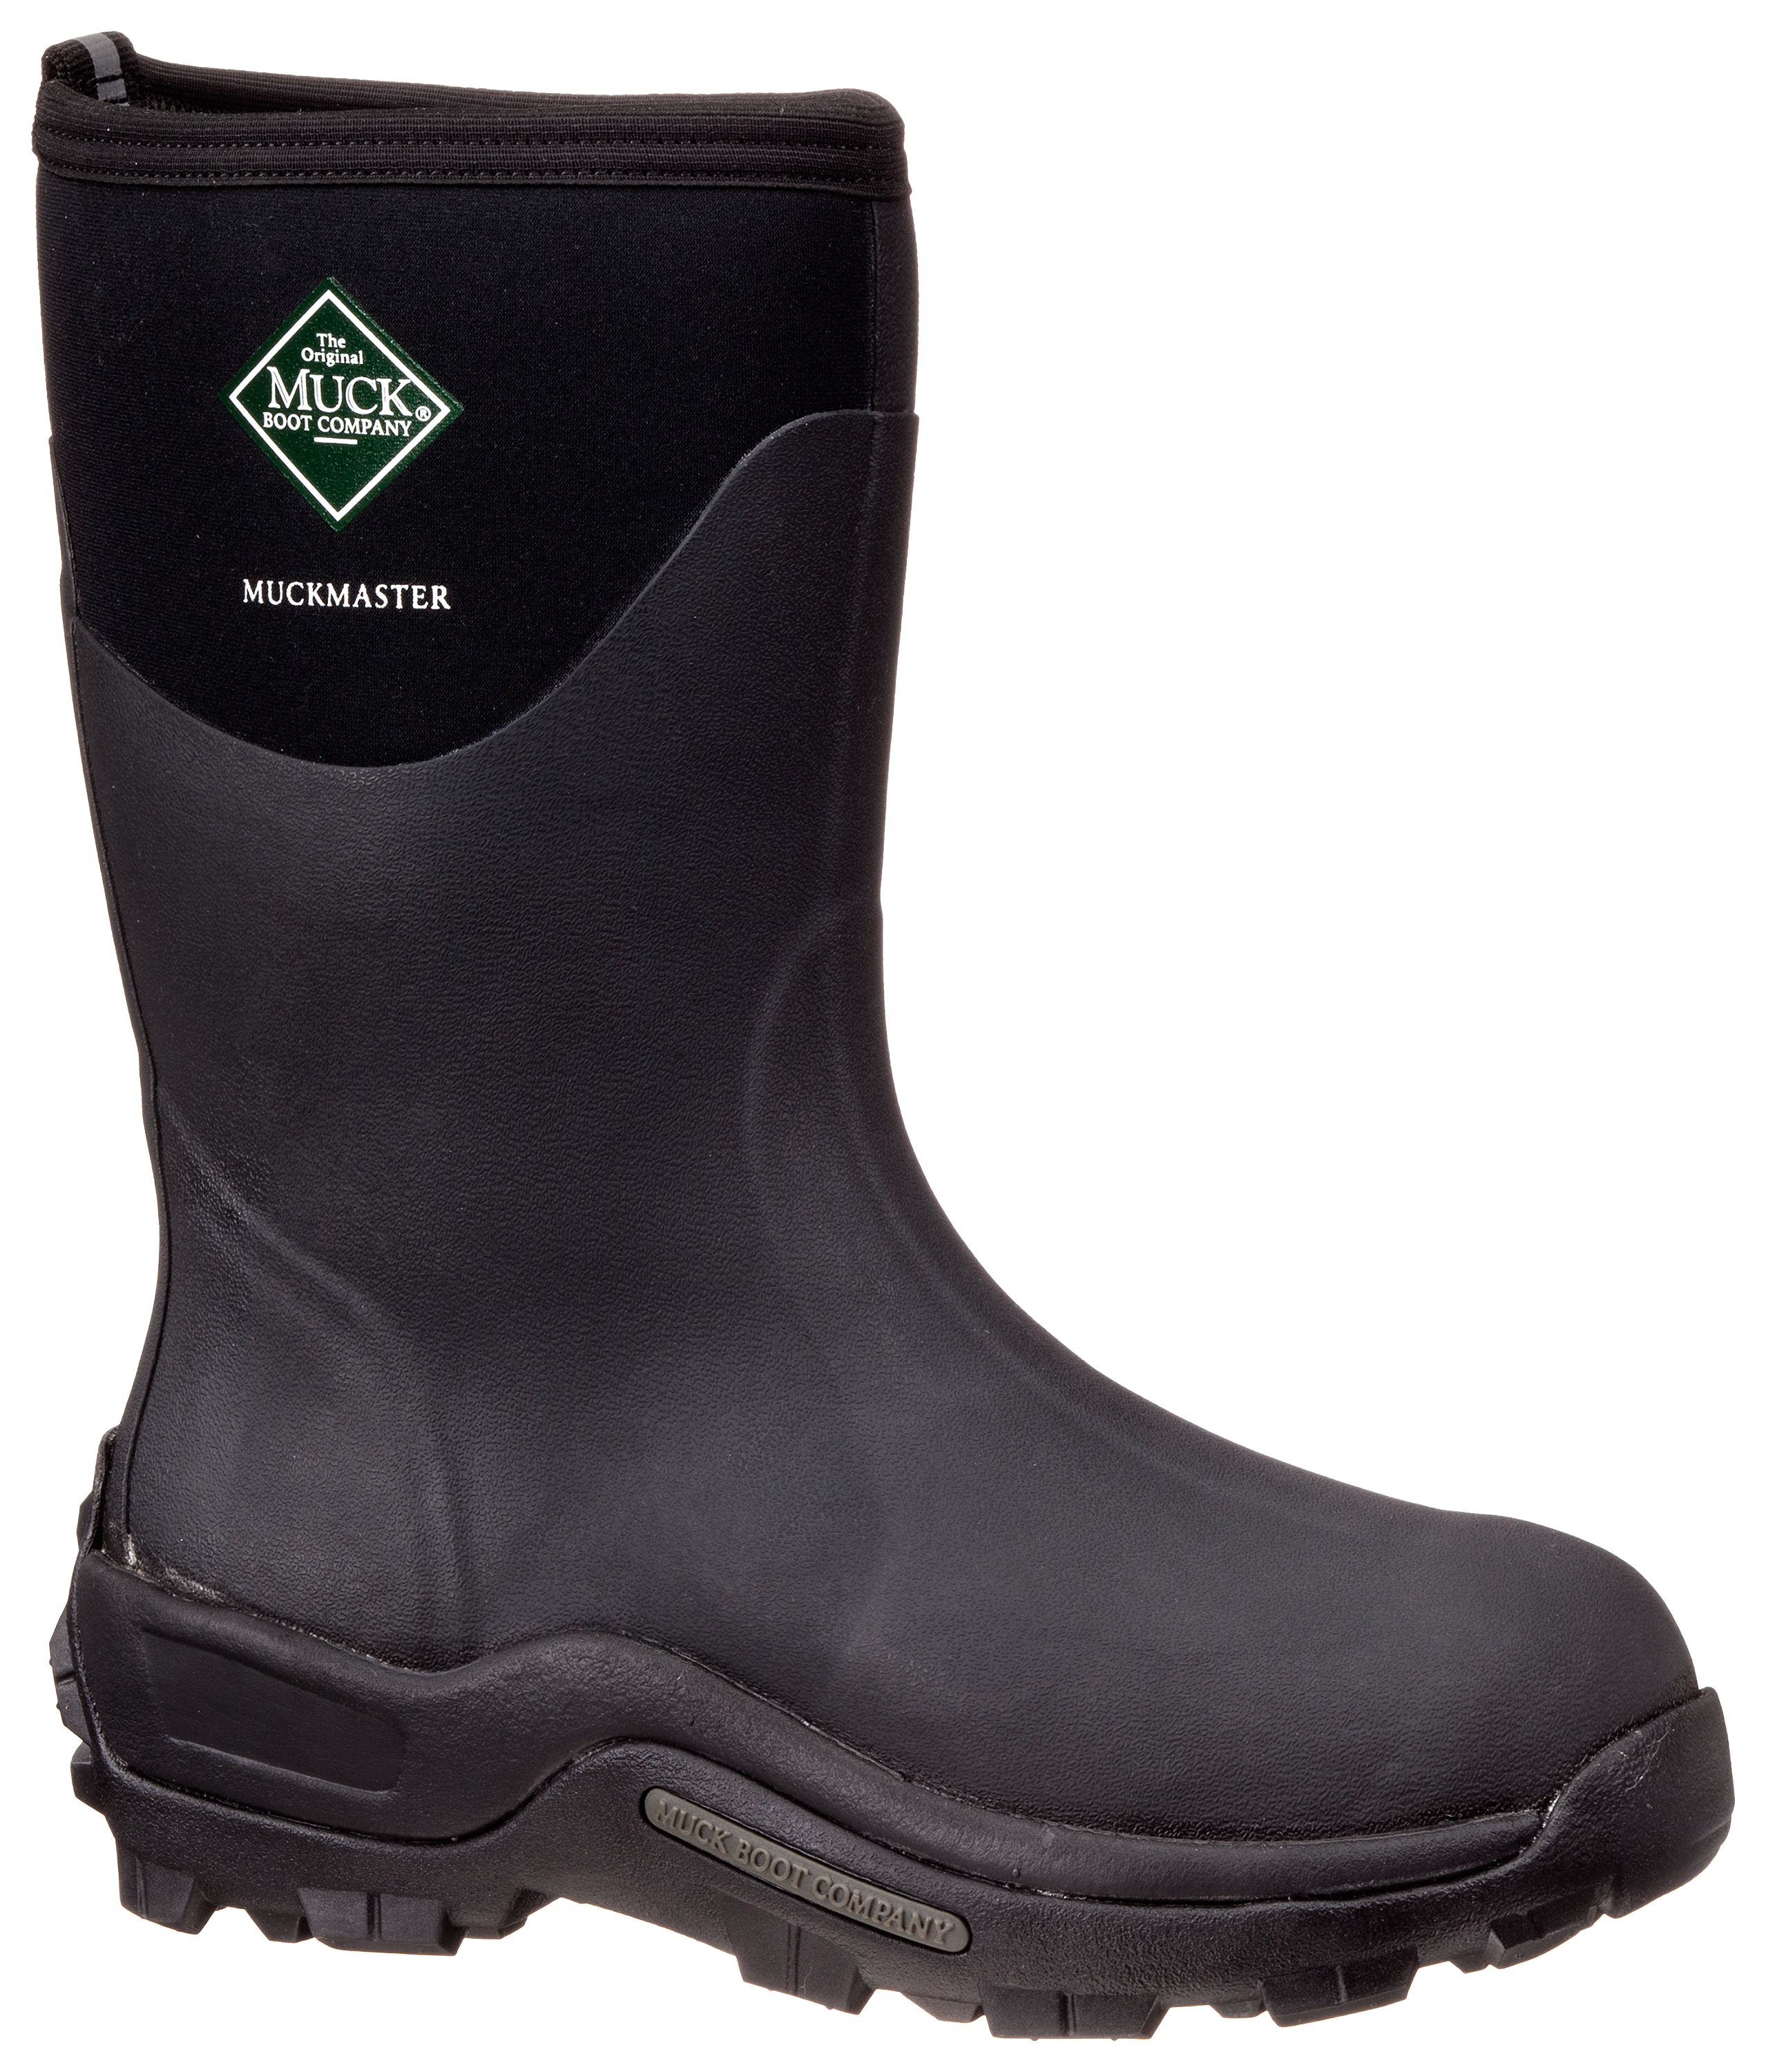 The Original Muck Boot Company MuckMaster Rubber Boots for Men | Bass ...